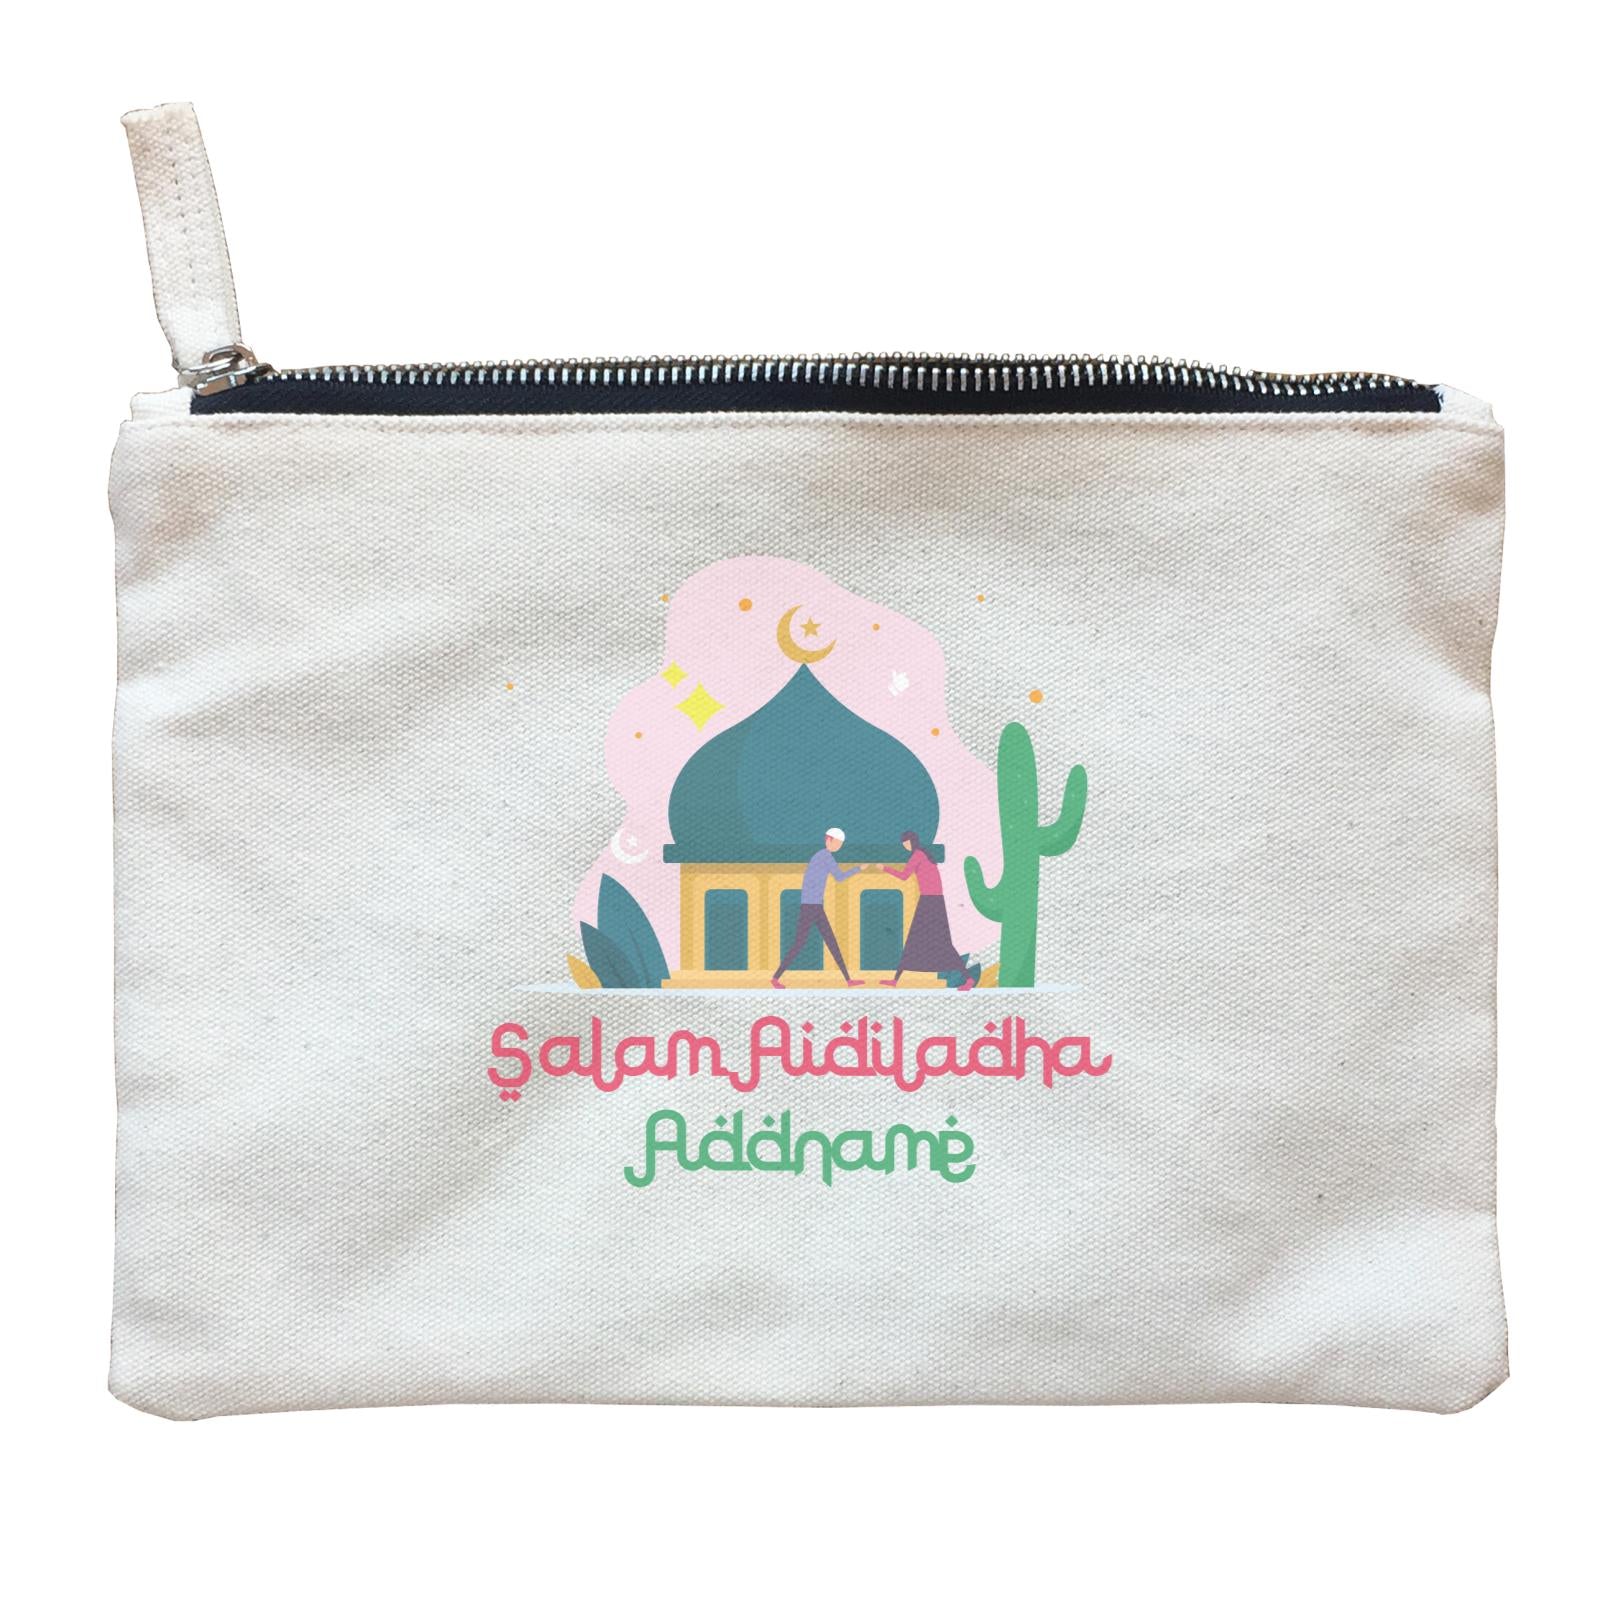 Aidiladha Sibling at Mosque Addname Zipper Pouch